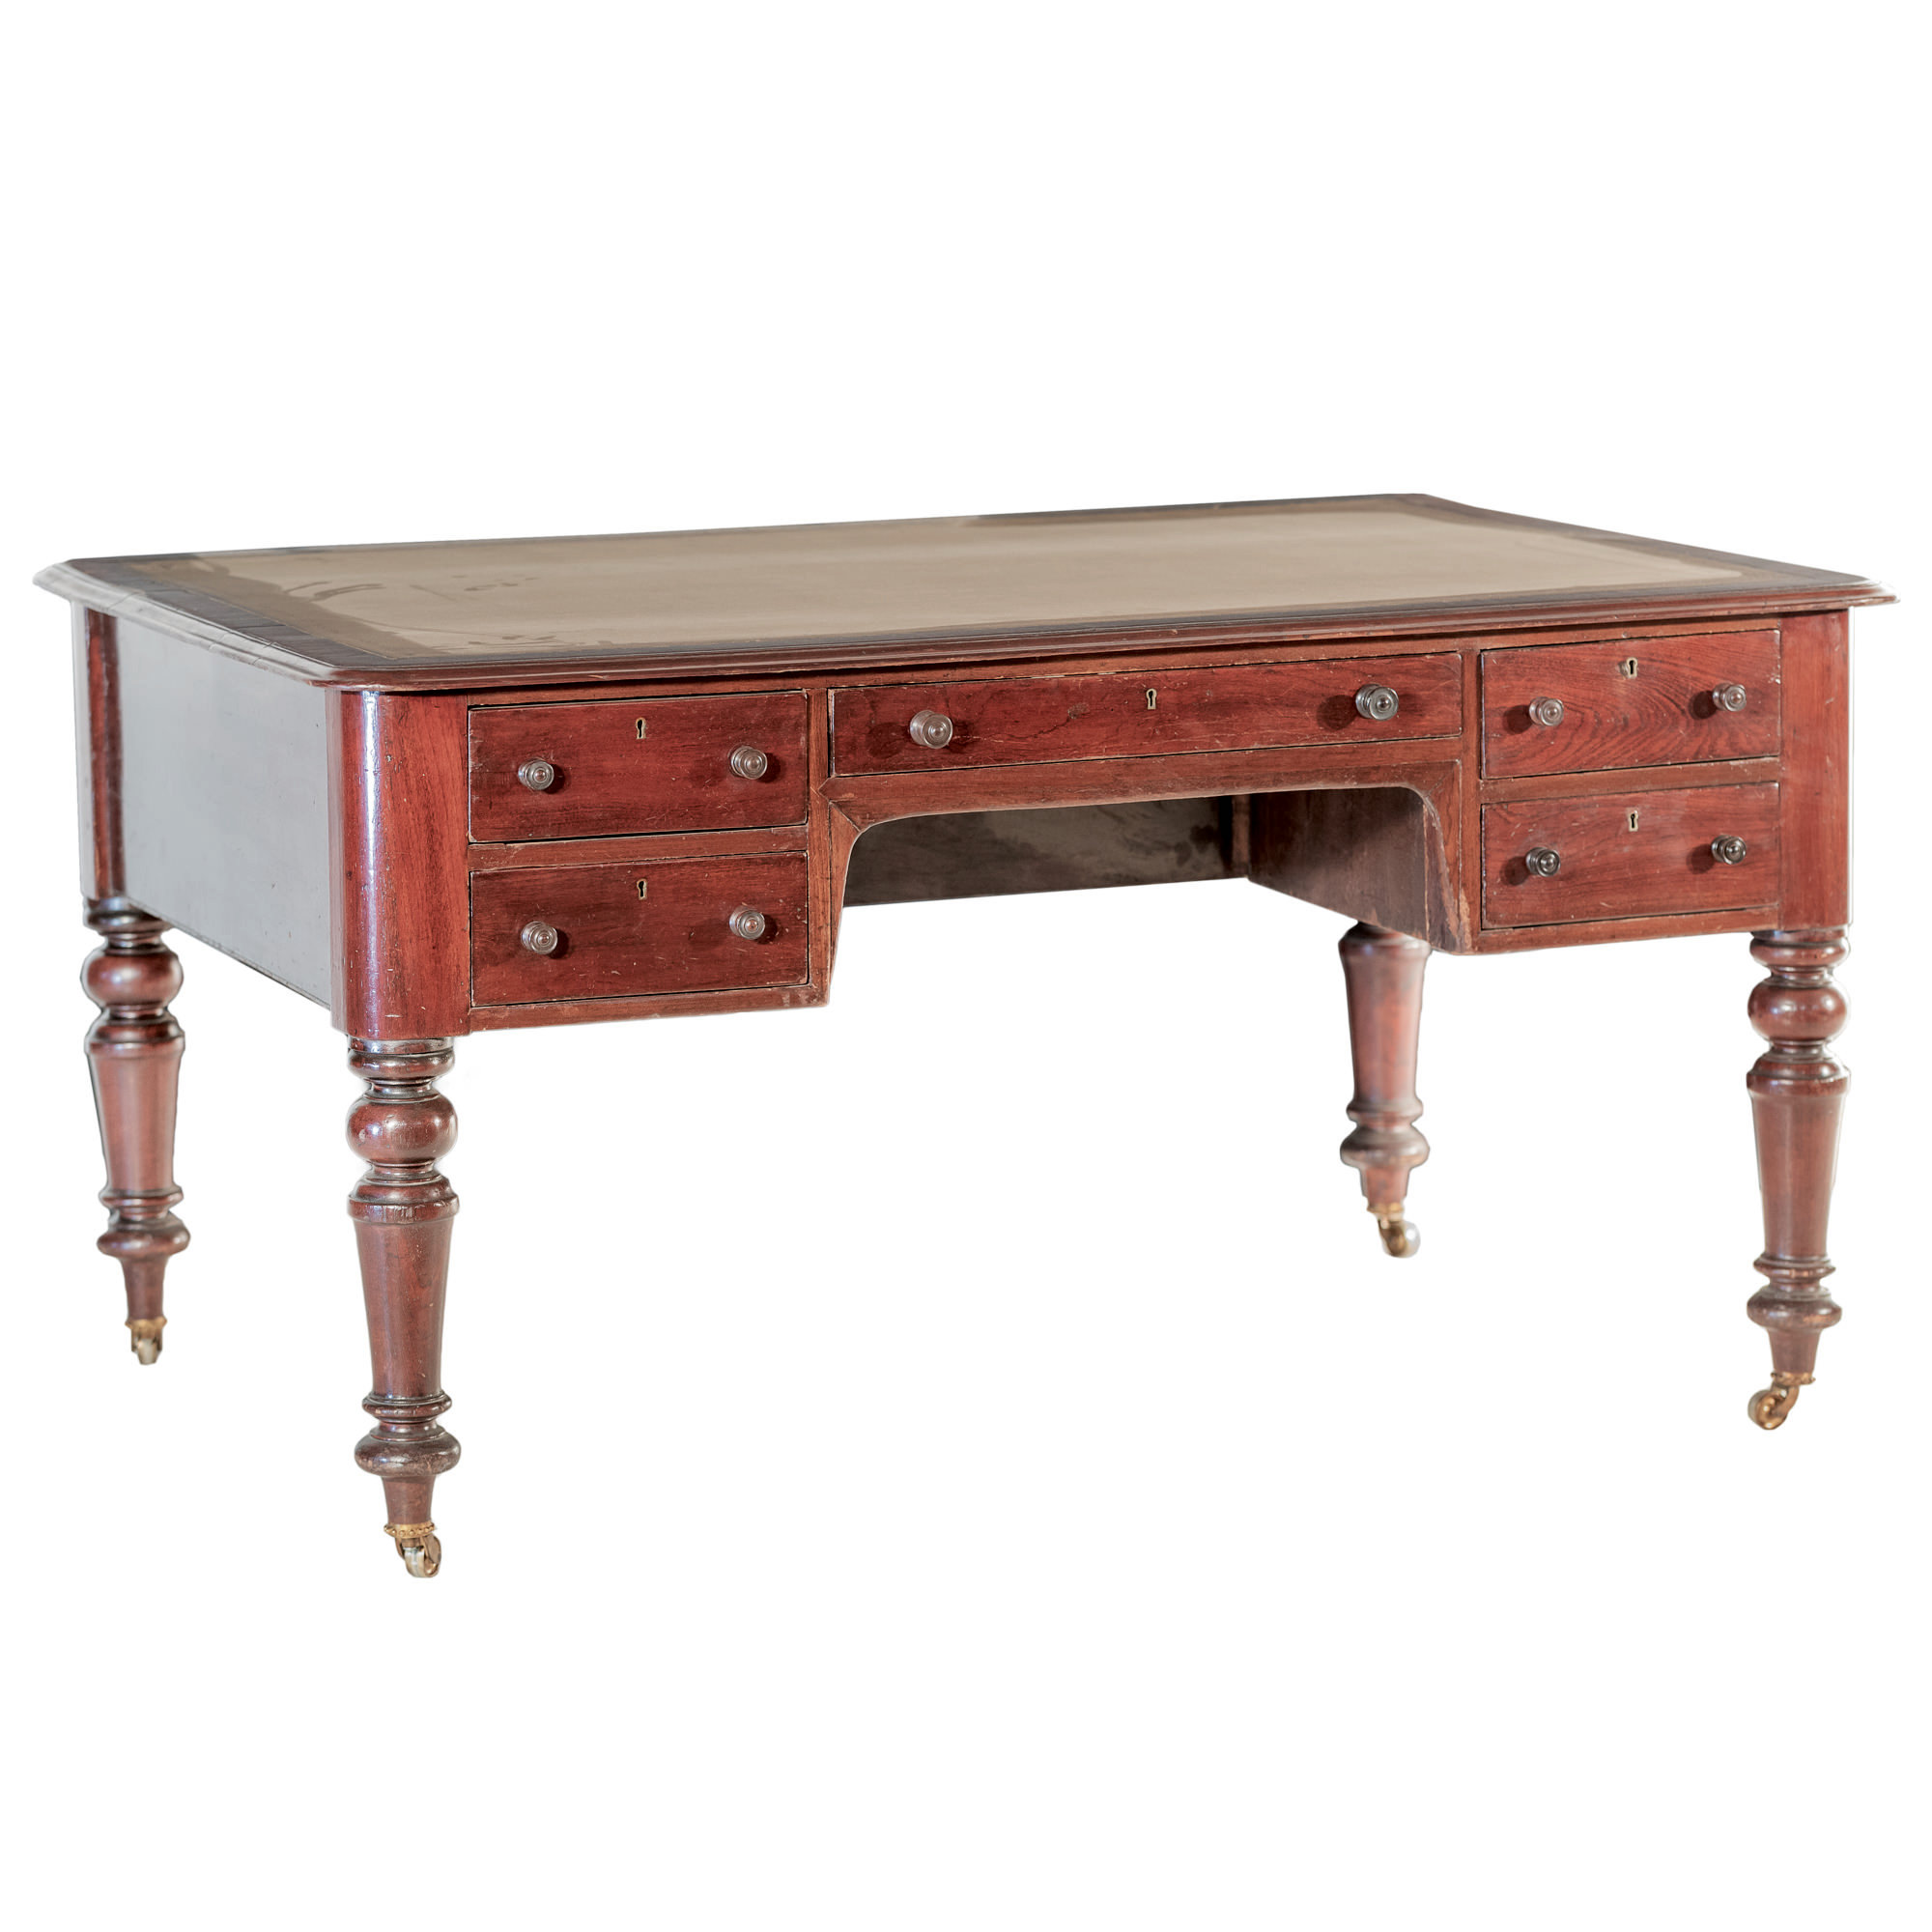 'Australian Cedar Kneehole Desk with Tooled Olive Leather Insert Late 19th Century'